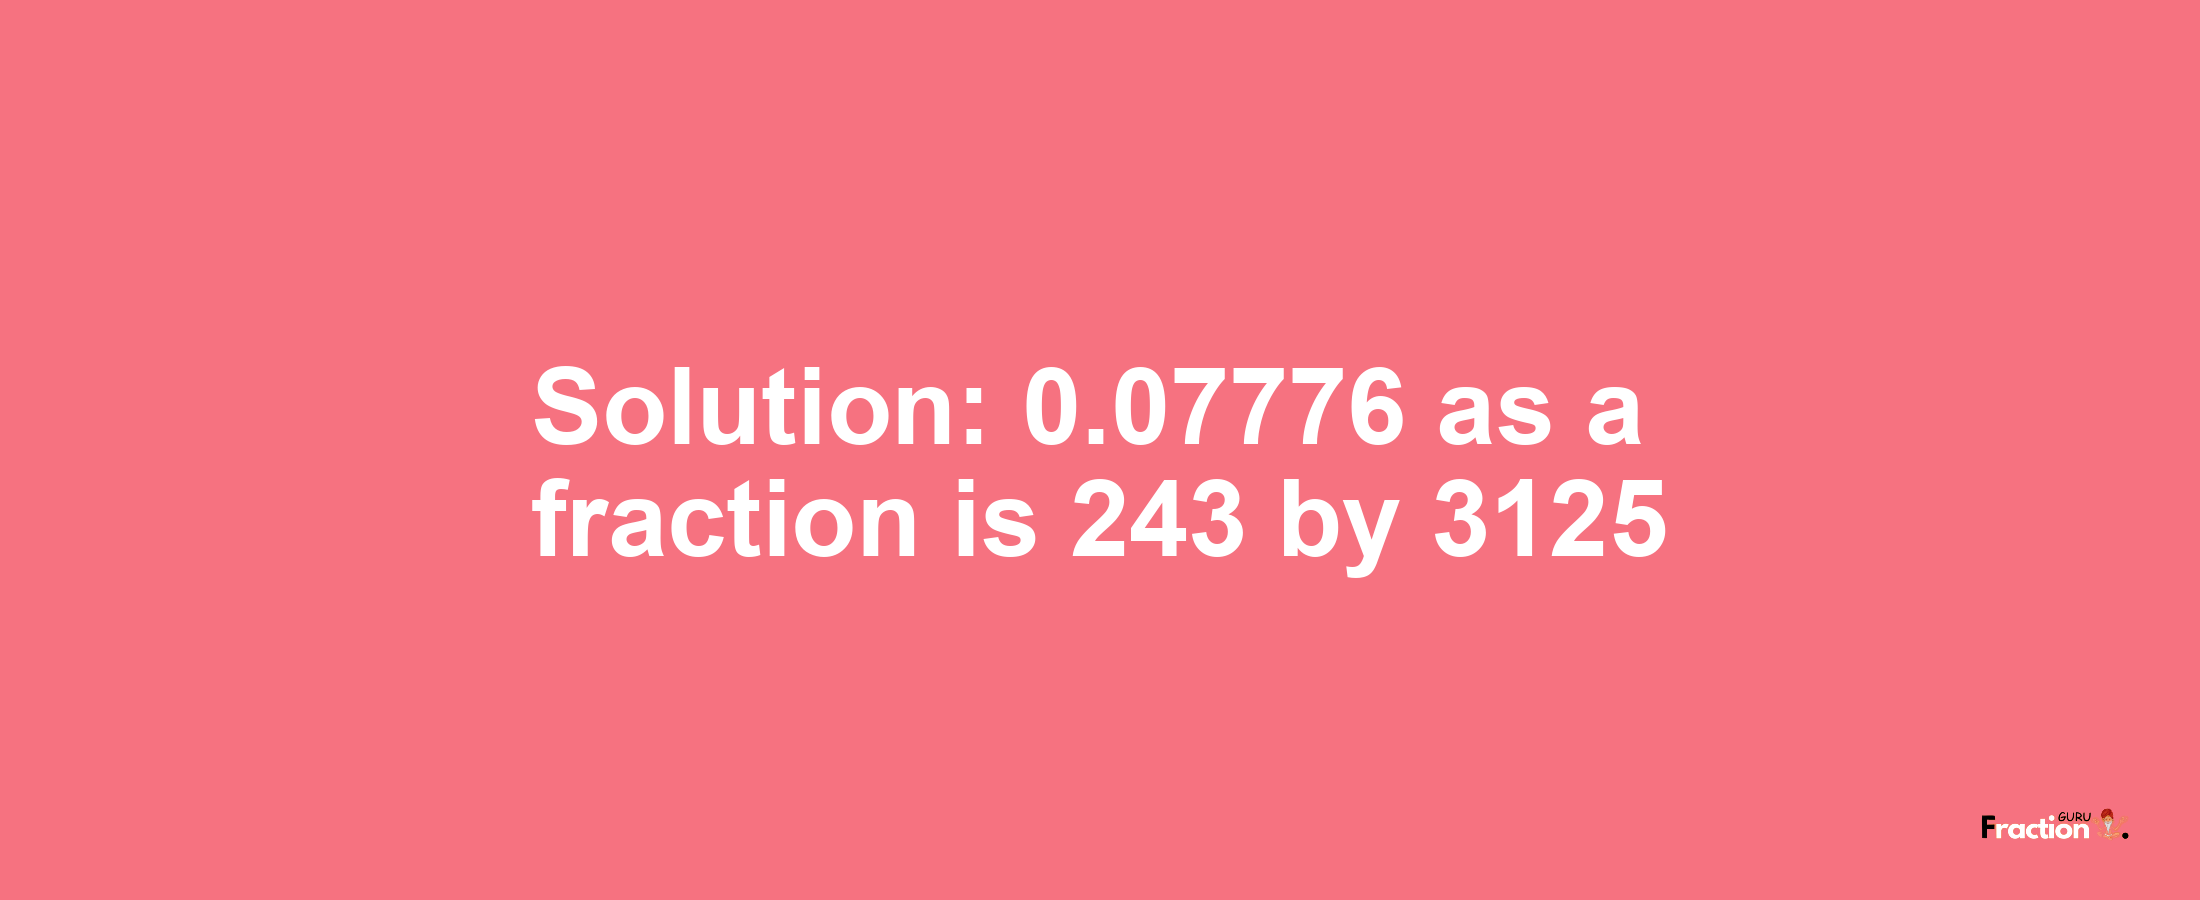 Solution:0.07776 as a fraction is 243/3125